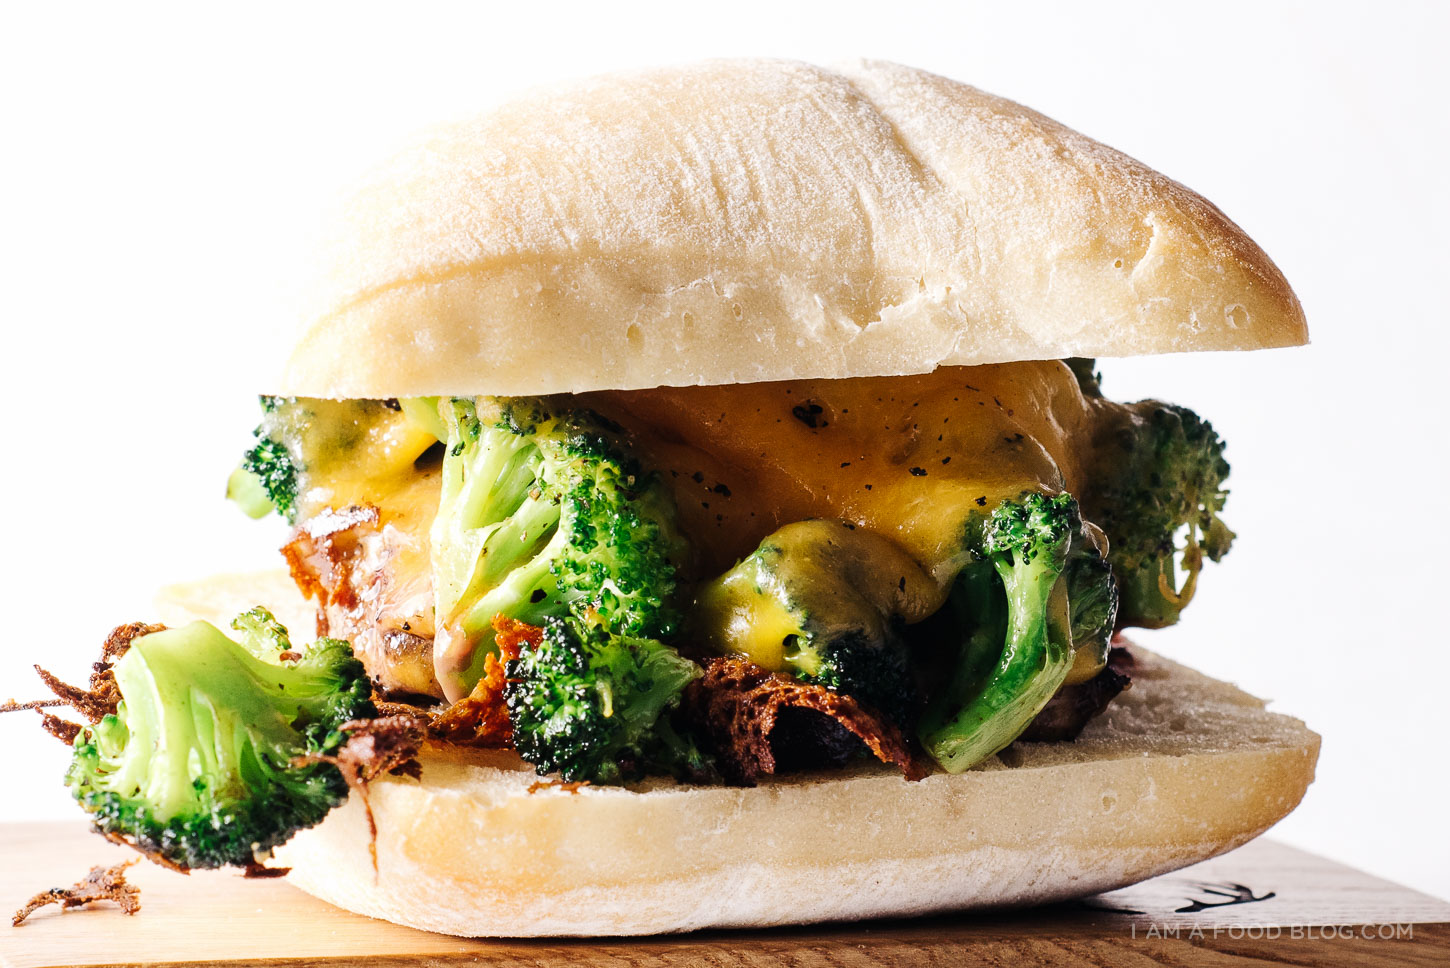 🍔 Build a Gross Burger and We’ll Reveal What You Should Be for Halloween This Year Broccoli on burger